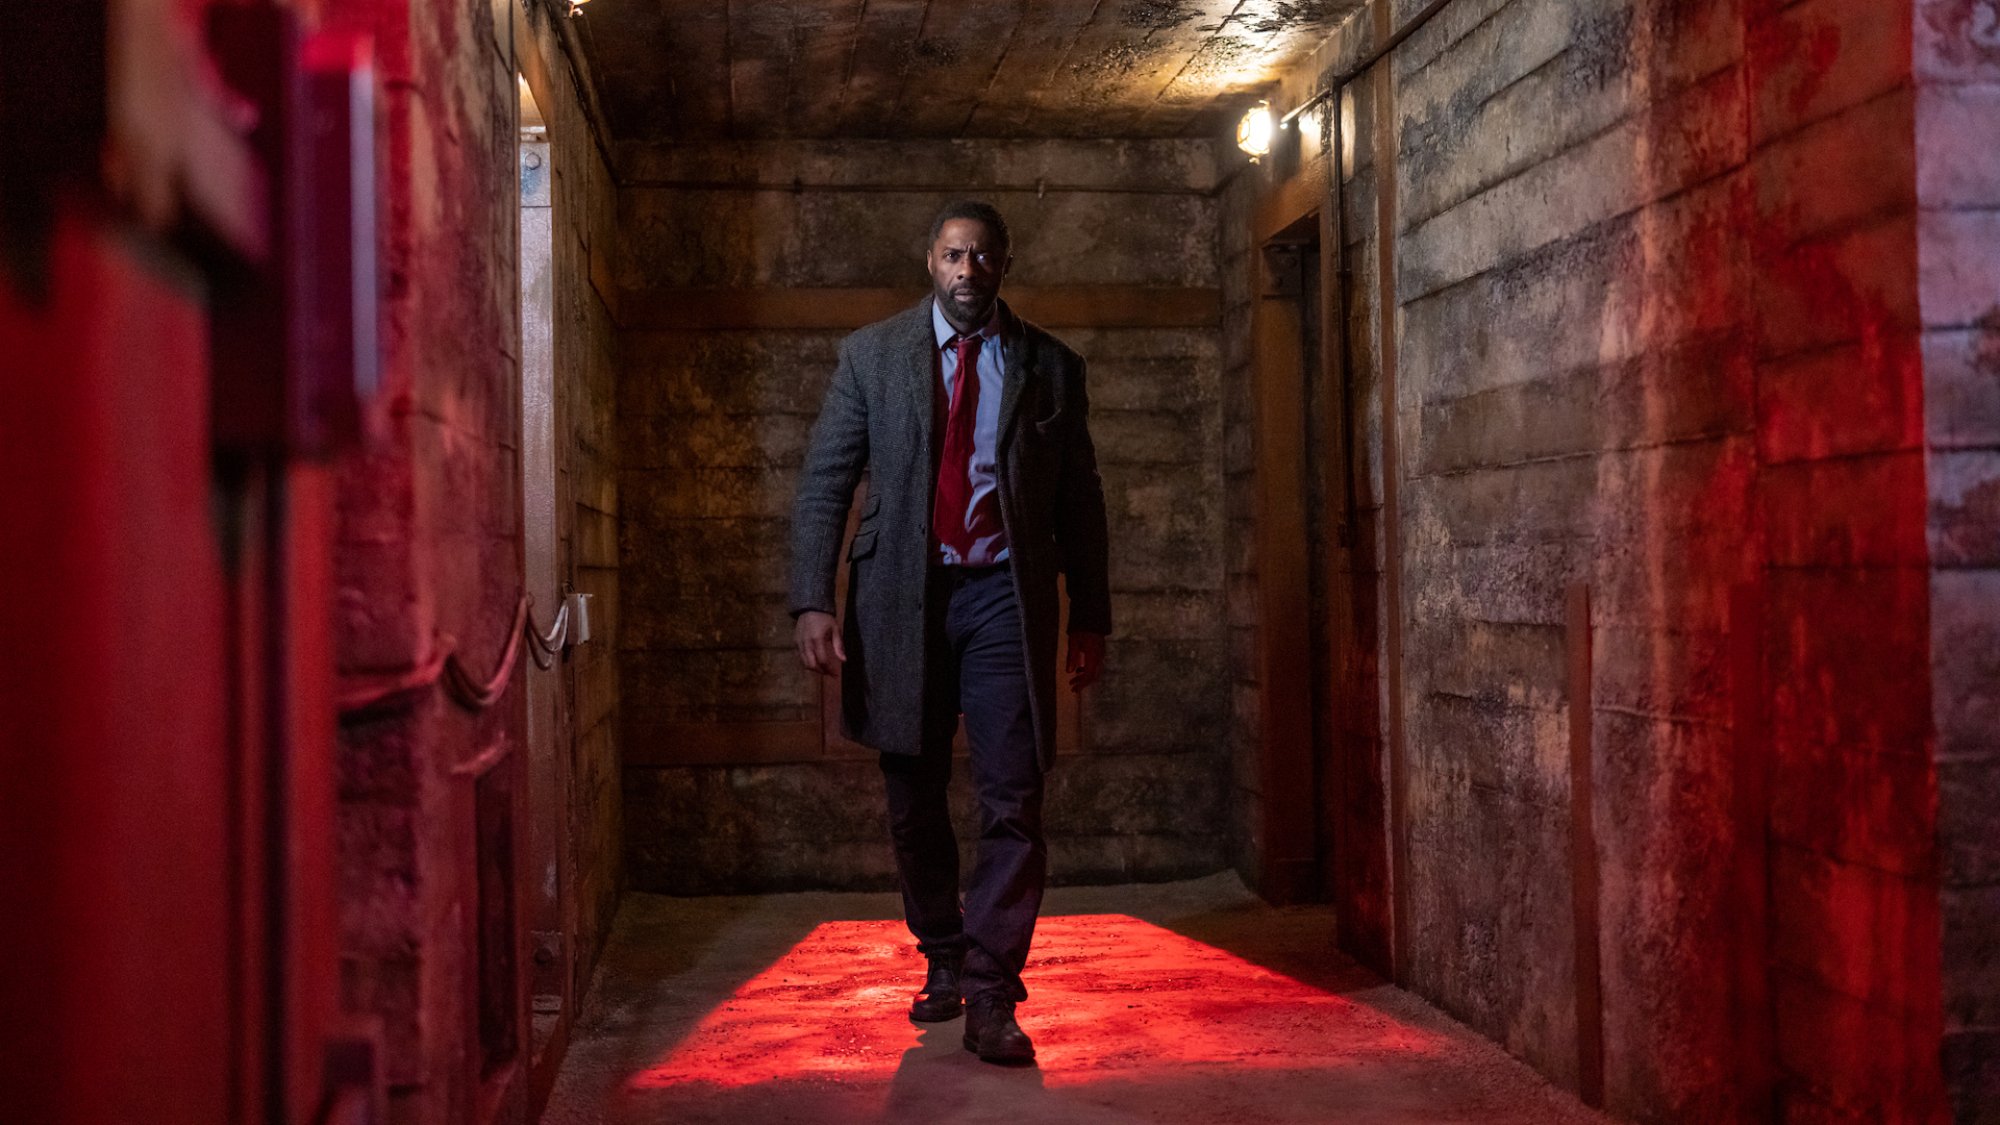 A man in a suit walks down a red-lit corridor of a shabby looking building.